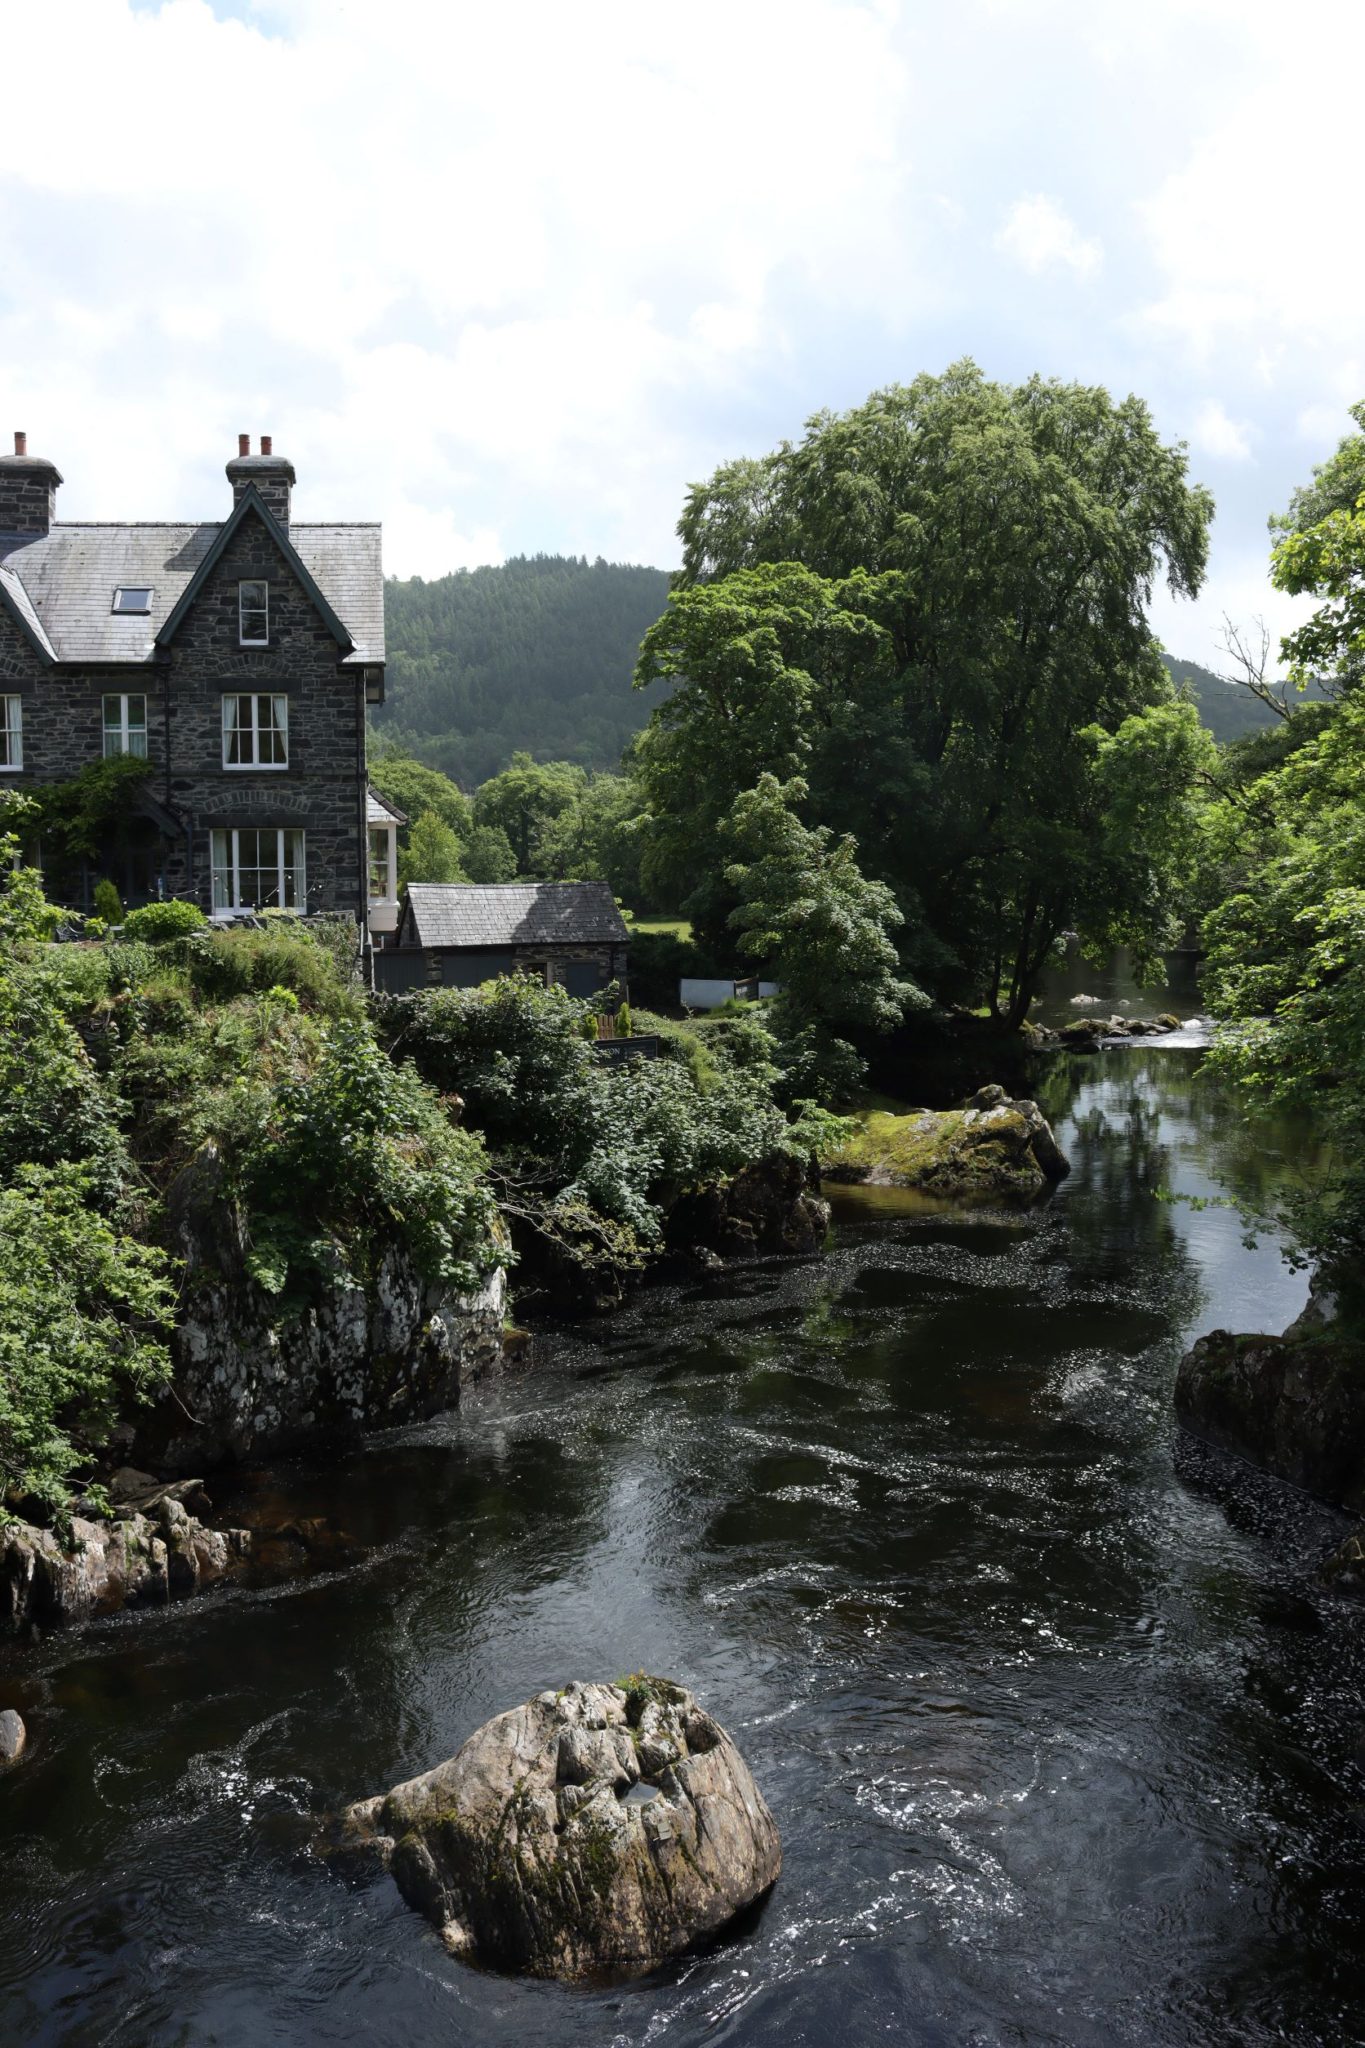 Betws-y-Coed, The Best Things to do in North Wales